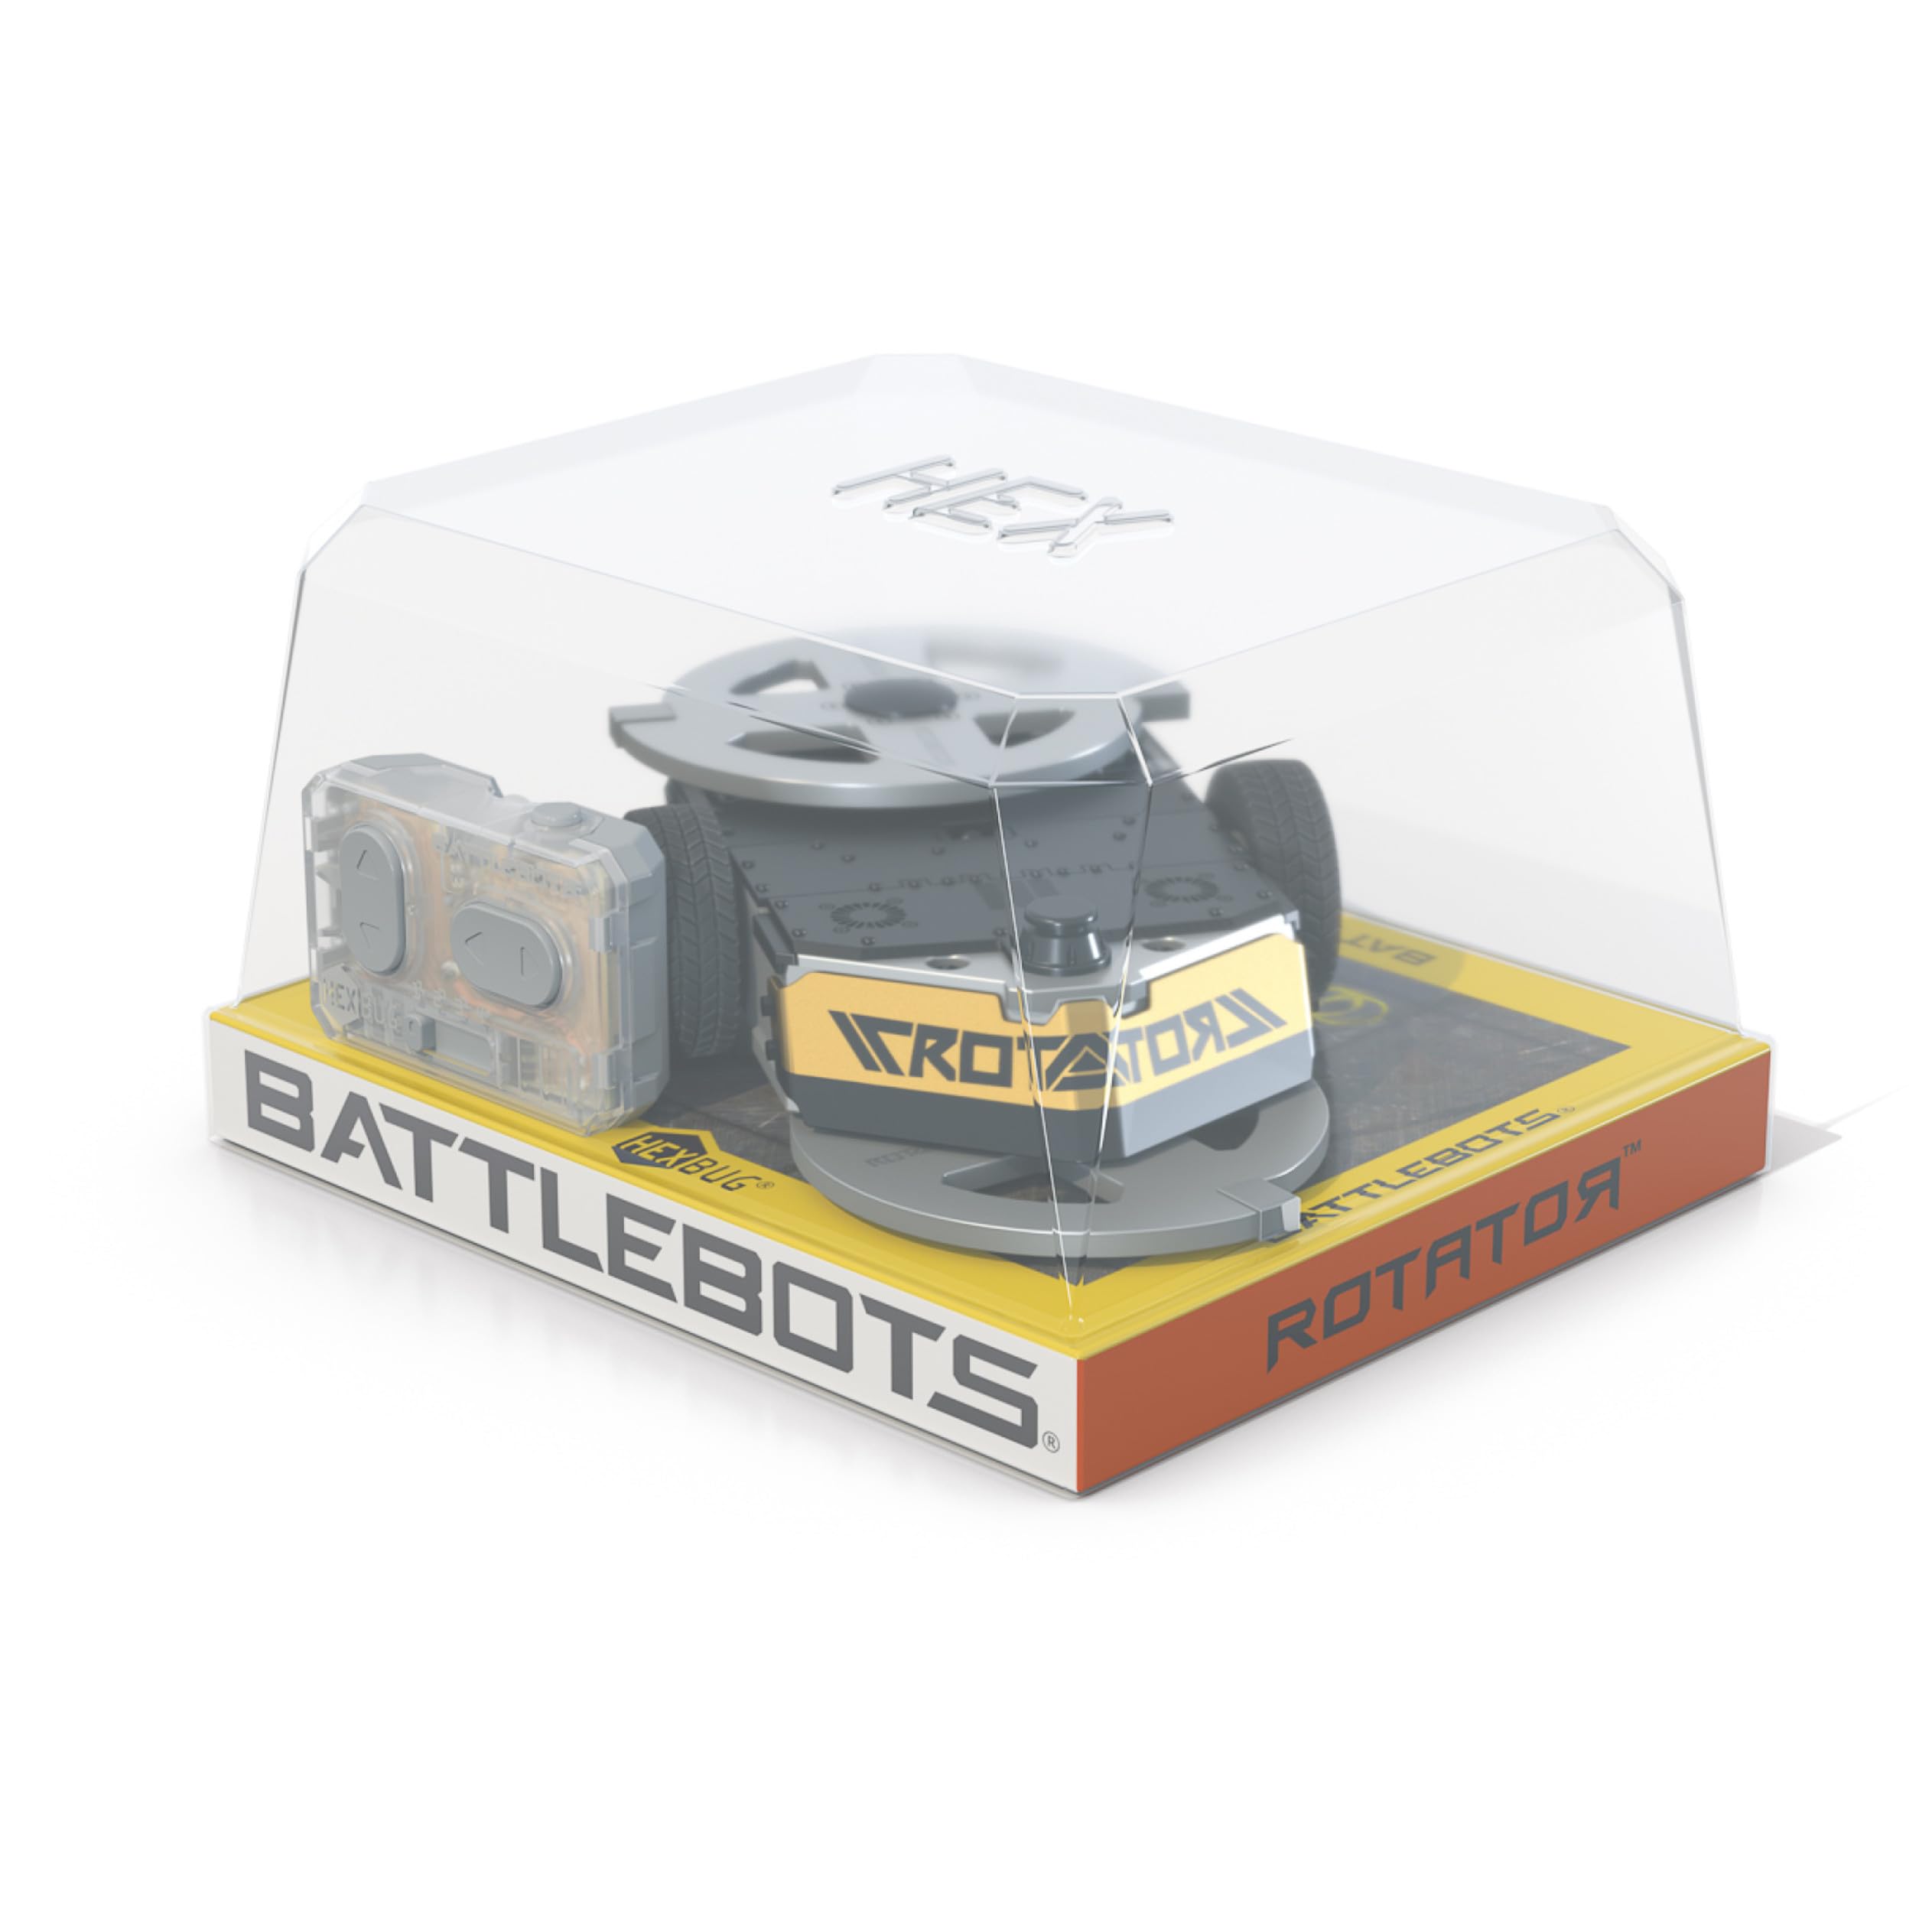 HEXBUG BattleBots Rotator, Remote Control Robot Toys for Kids, STEM Toys for Boys and Girls Ages 8 & Up, Batteries Included